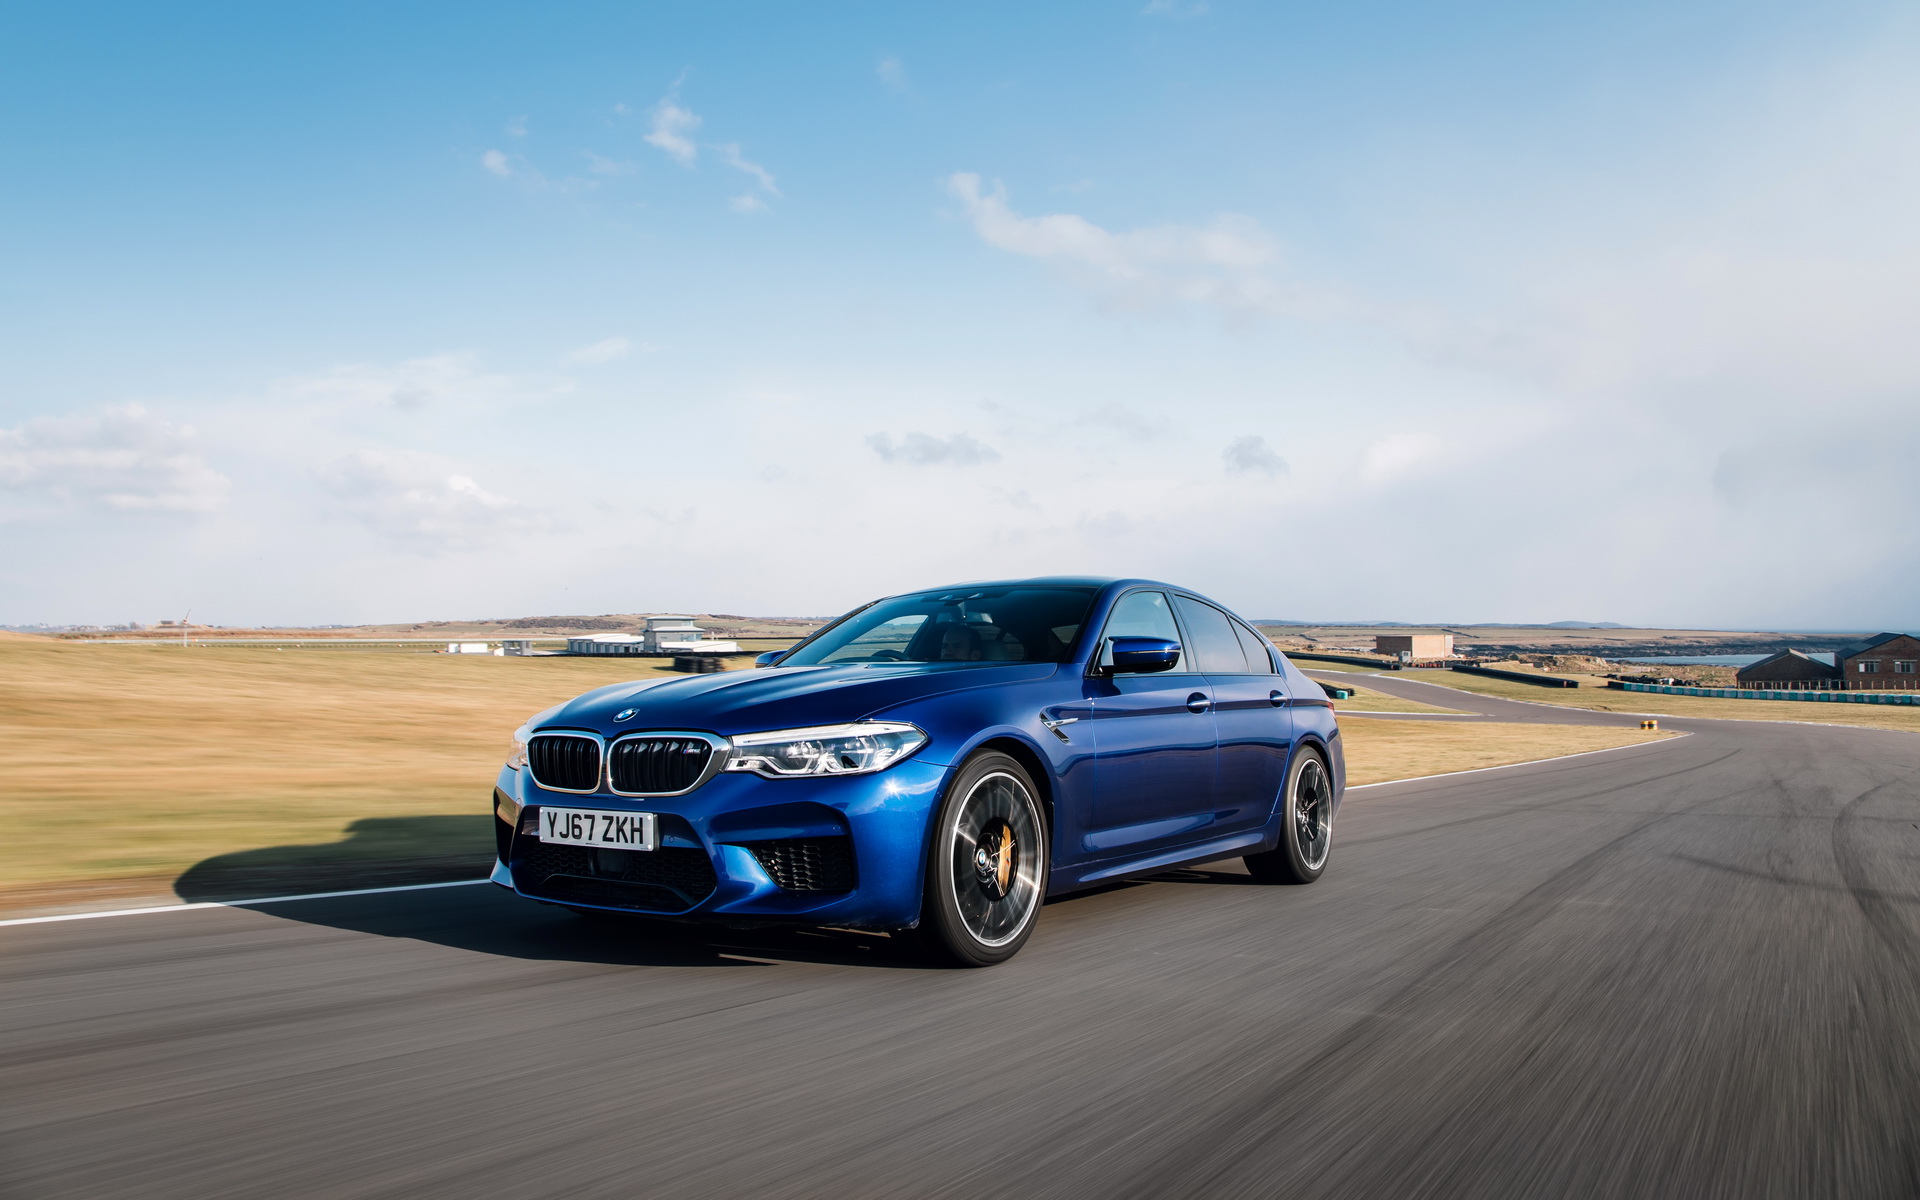 UK – Videos and Media Gallery: 2018 BMW M5 Announced – Price Set at £89,645